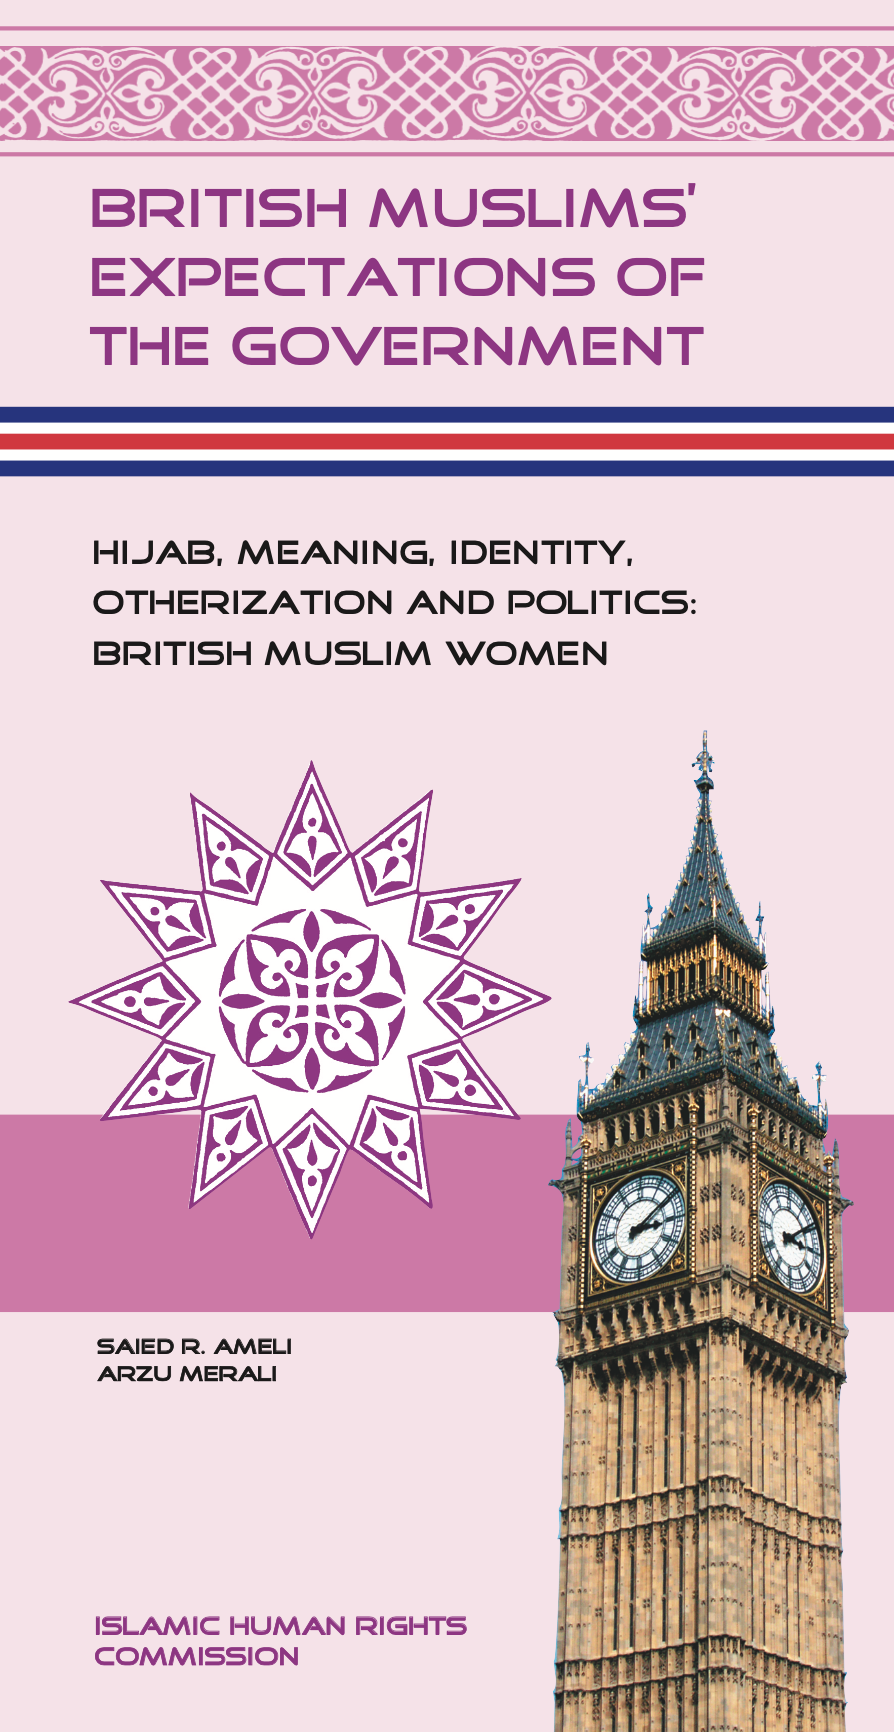 Hijab, Meaning, Identity, Otherization and Politics: British Muslim Women (Volume 4) - S.R. Ameli and Merali, A.